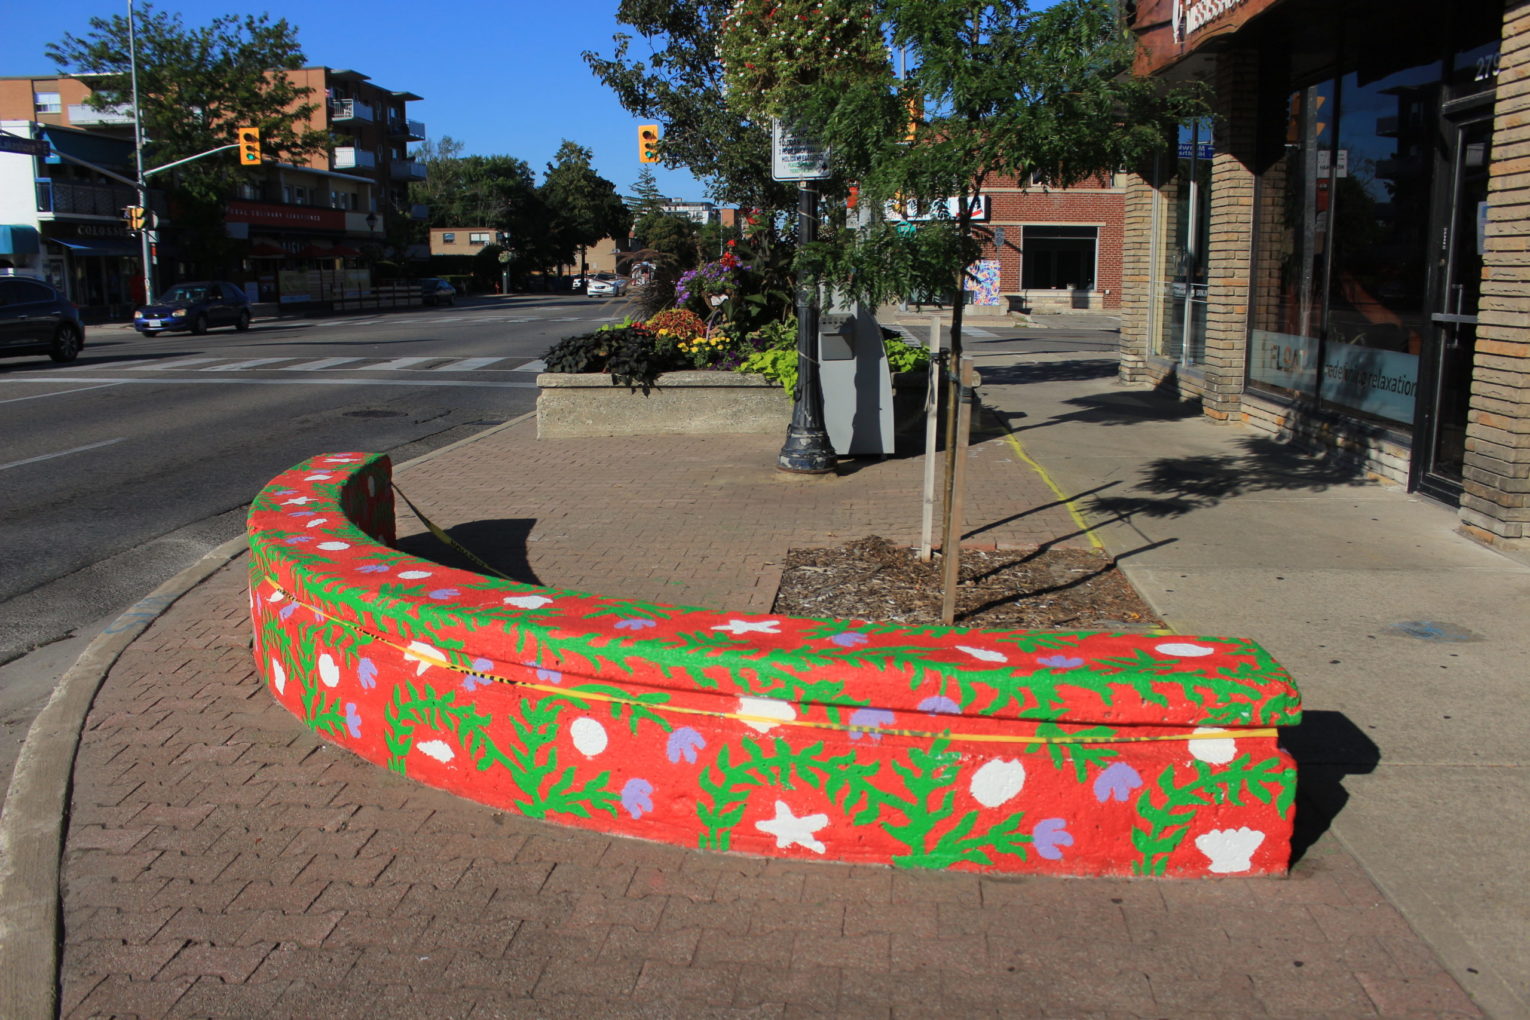 Public seating area in Port Credit is painted by artist Erin McCluskey